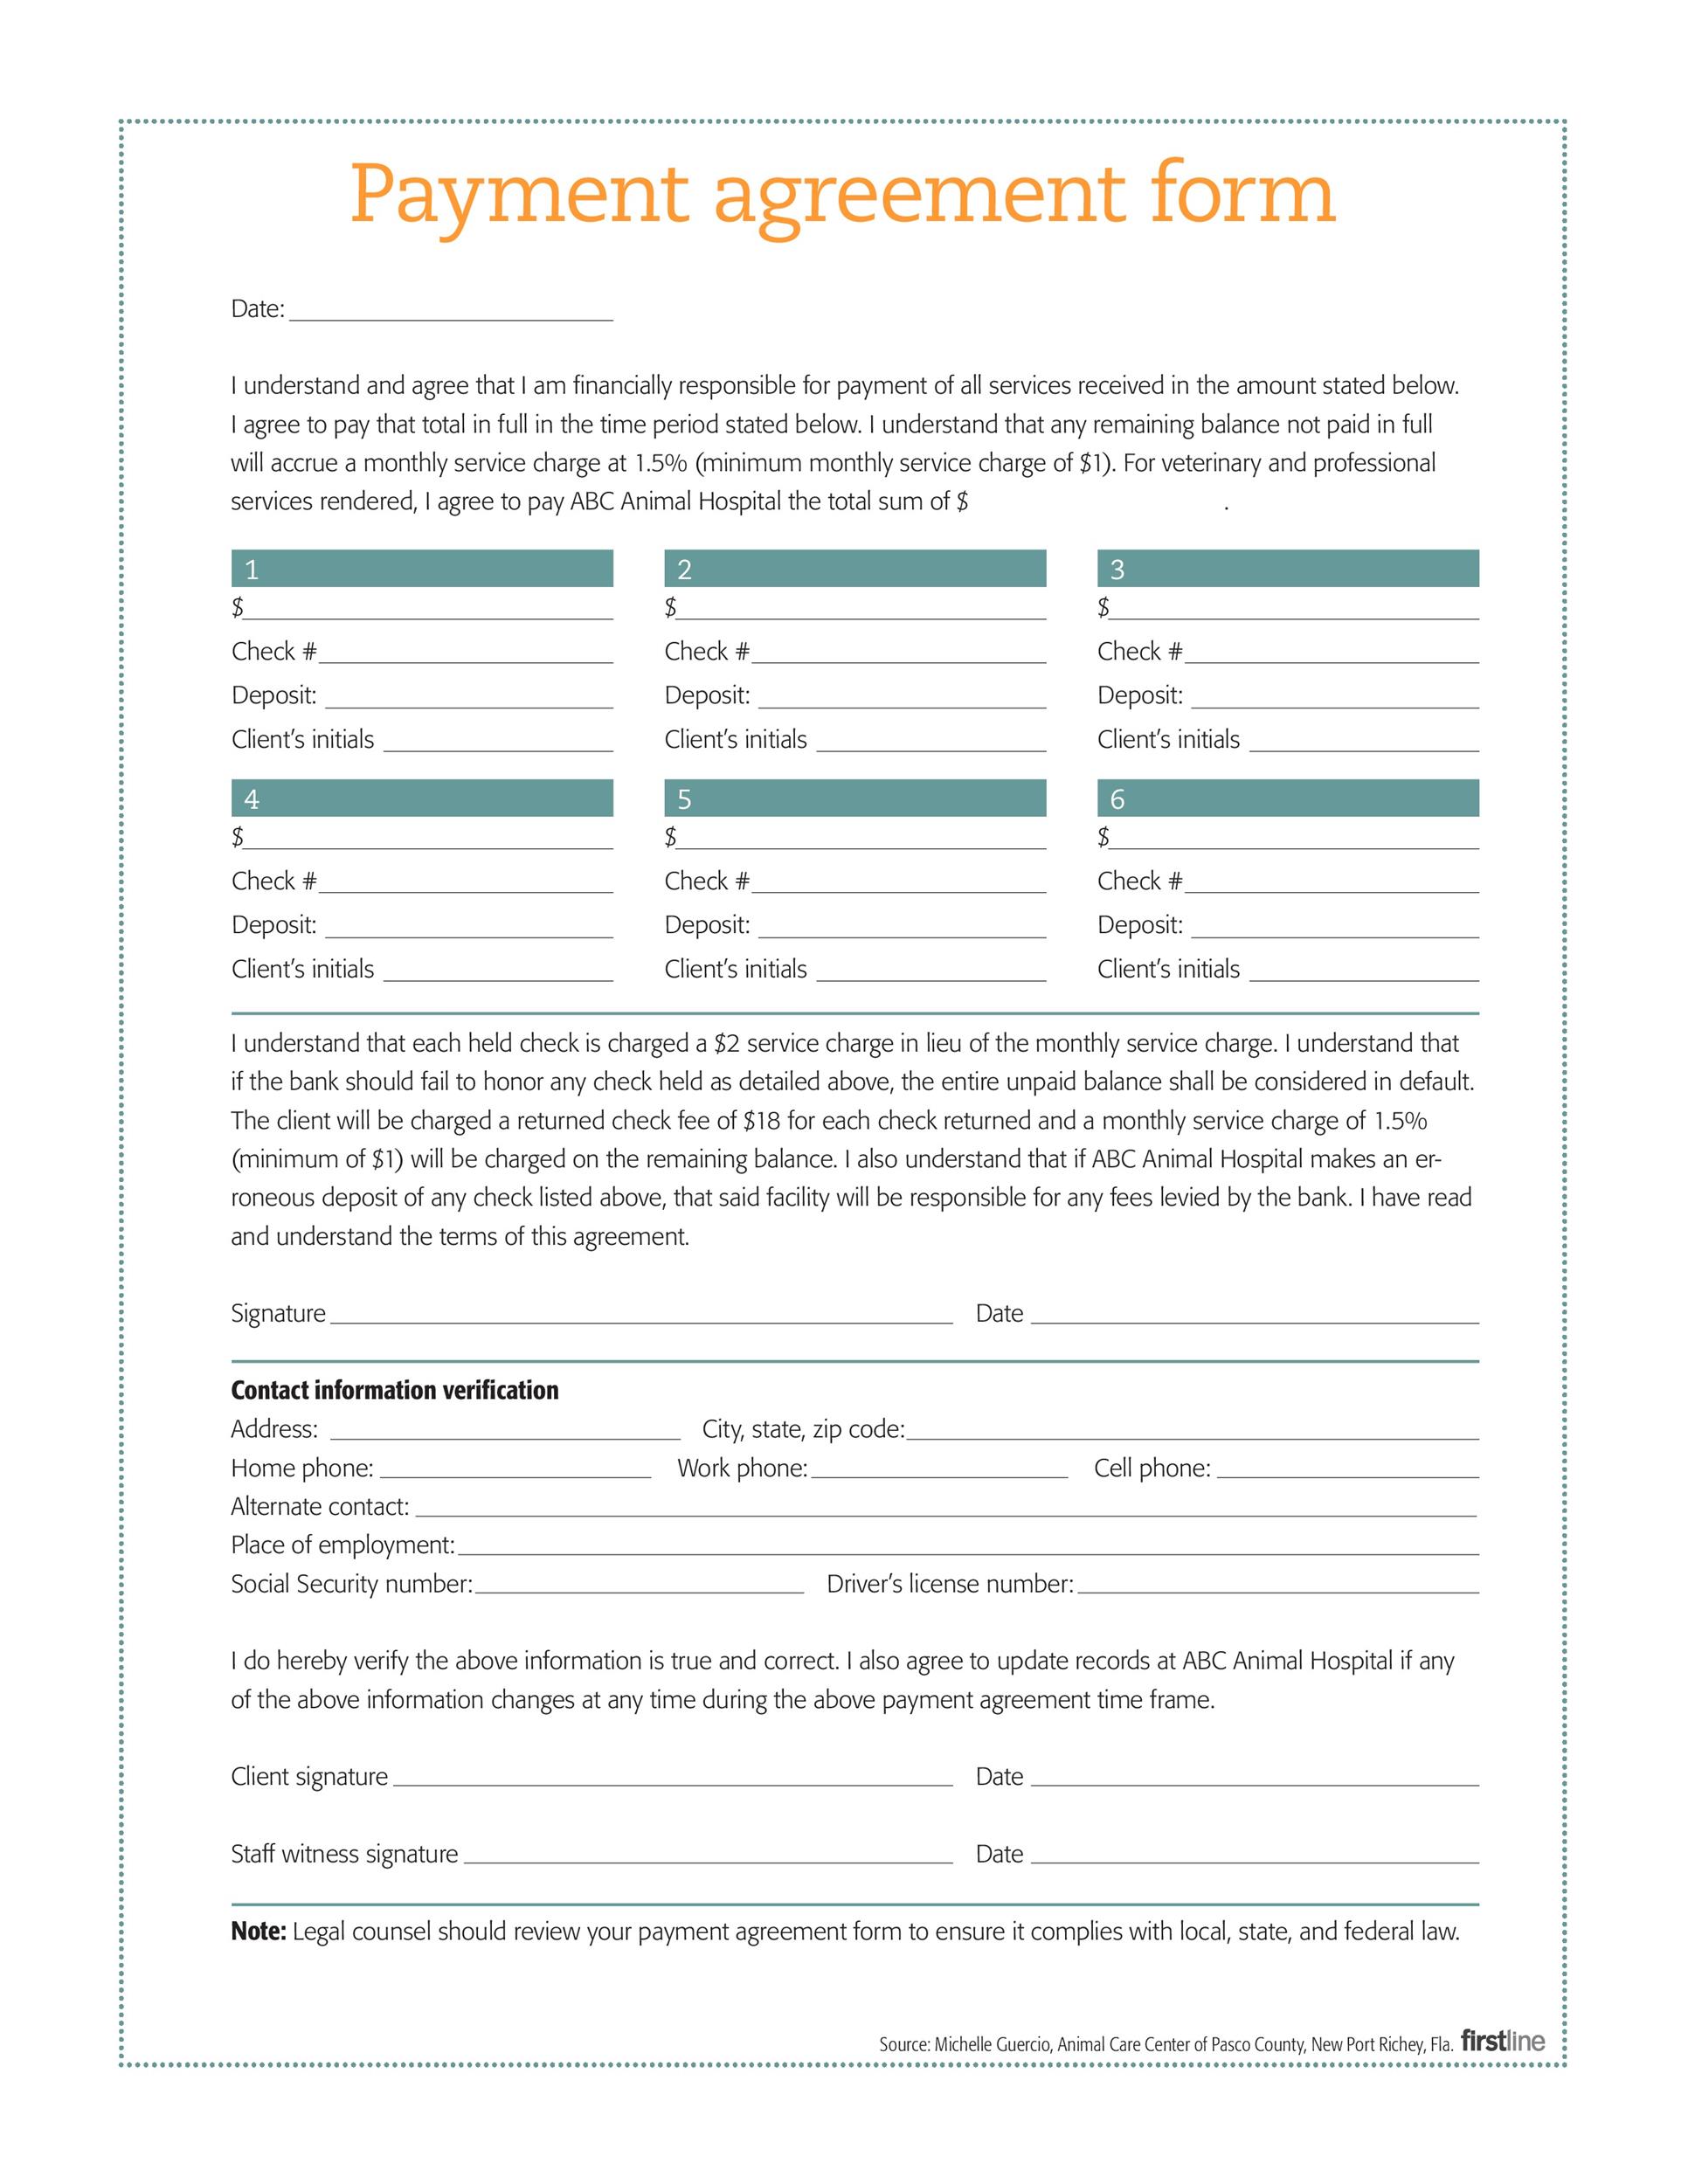 Free payment agreement template 17